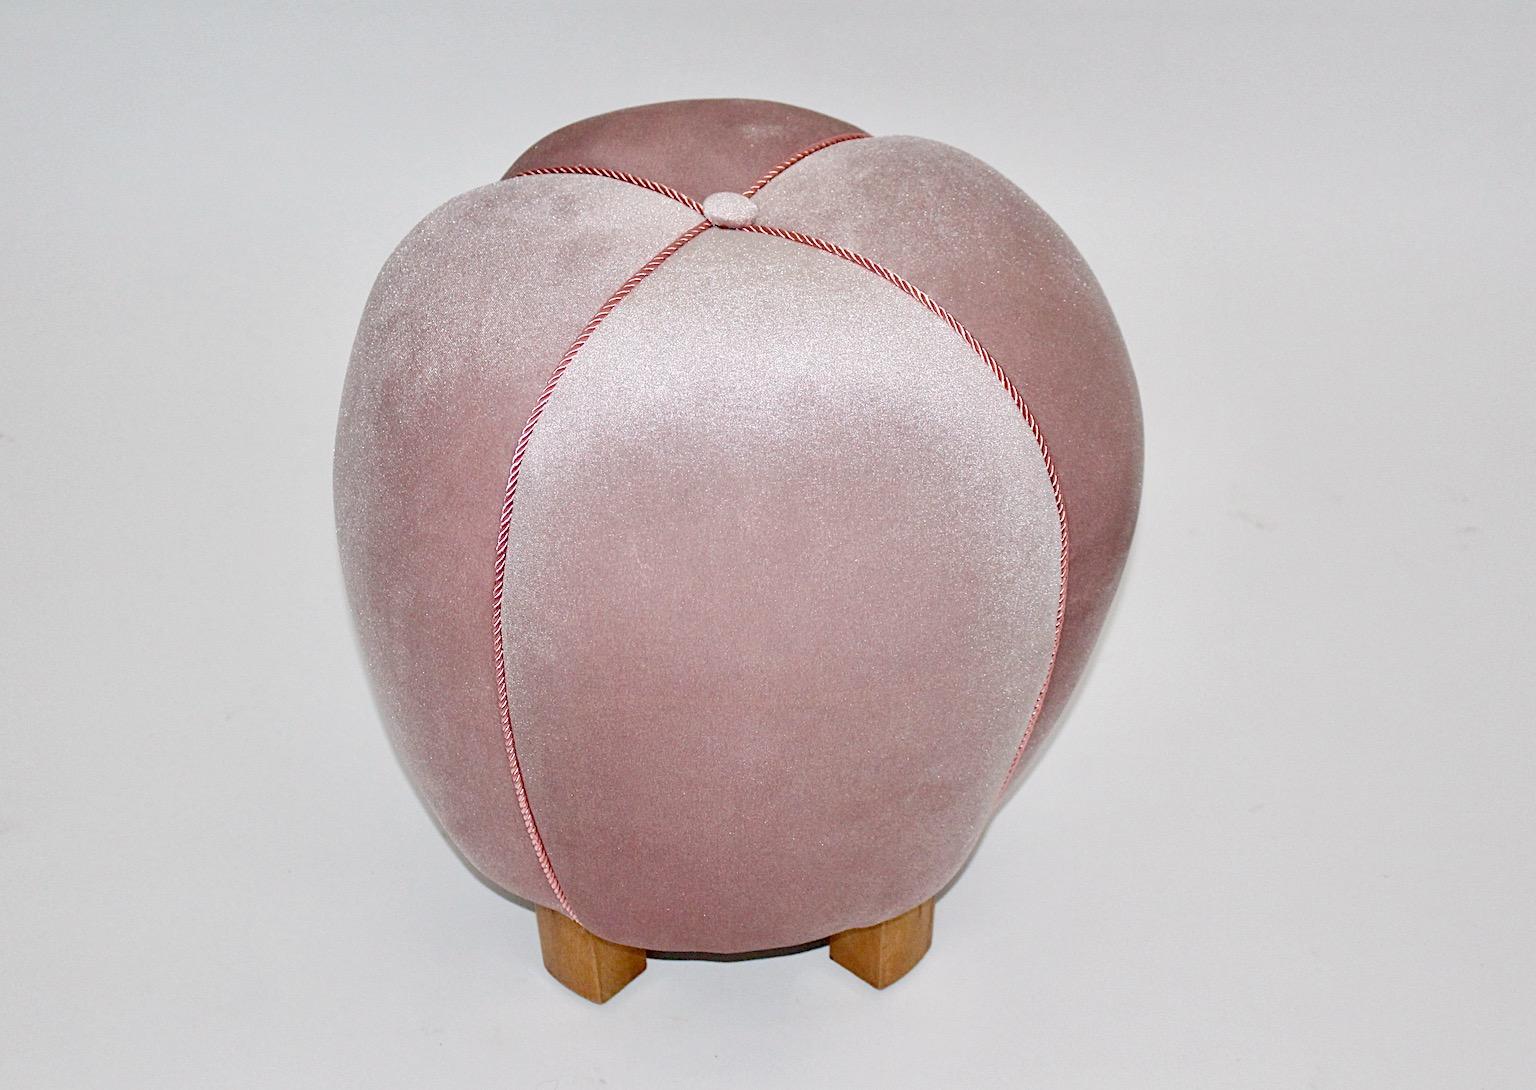 Art Deco vintage pouf or ottoman or stool from beech and pink velvet fabric Austria 1930s.
Very elegant pouf or stool in a beautiful soft pink mauve color, which underlines the certain elegance from the curvy shape.
Decorated with cords in its